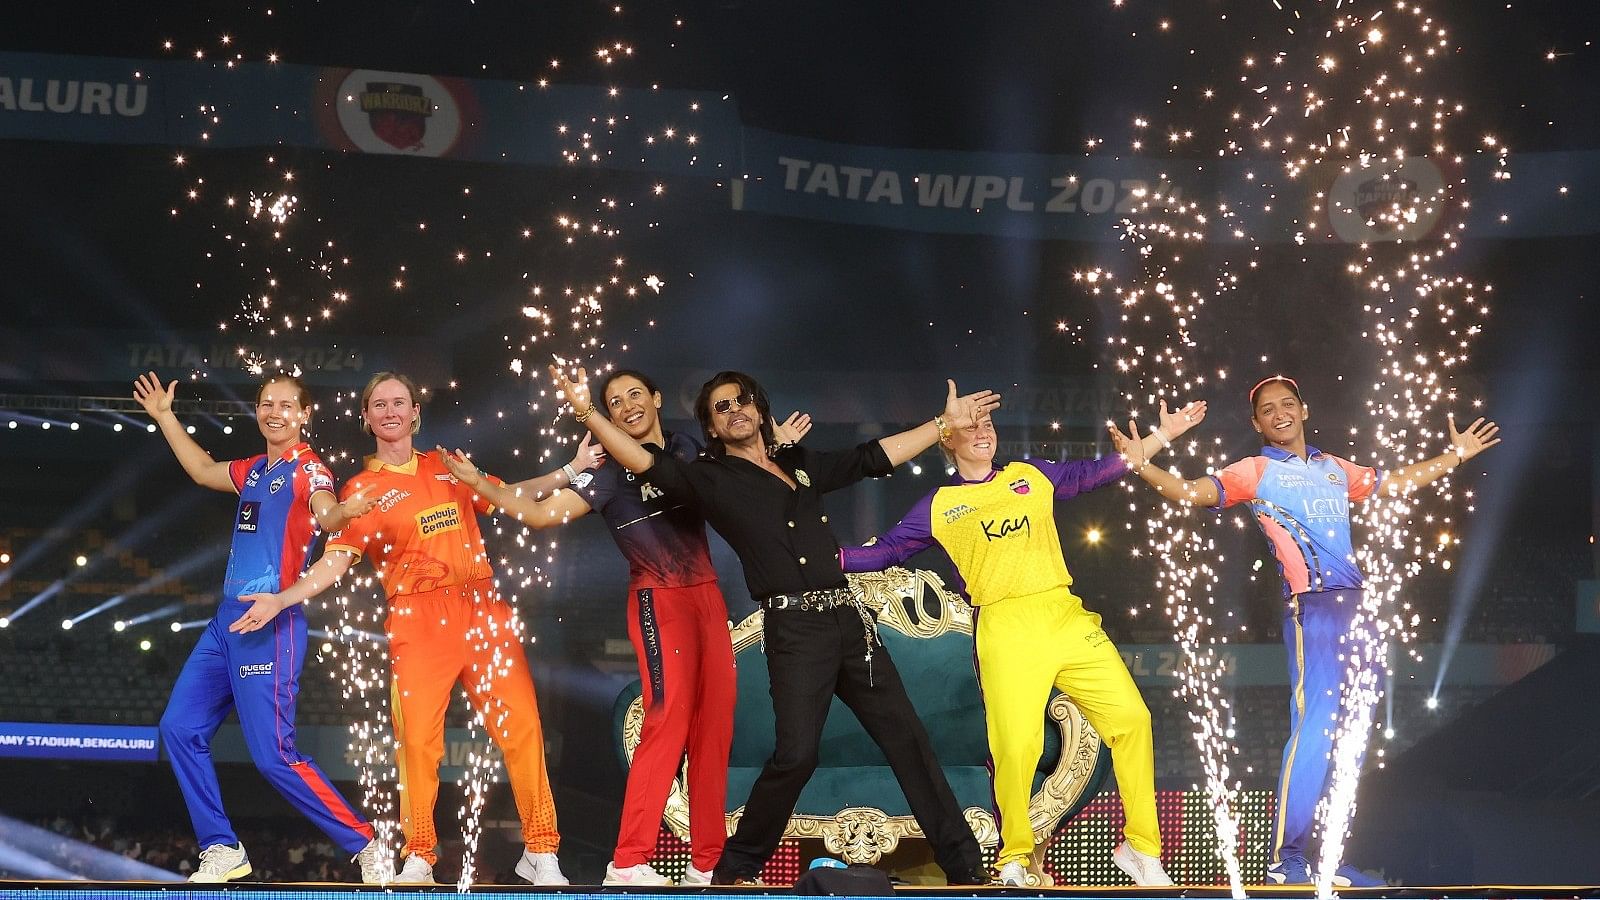 <div class="paragraphs"><p>WPL 2024&nbsp;ot underway in Bengaluru on Friday evening with a star-studded opening ceremony that featured performances by Shah Rukh Khan, Varun Dhawan, Shahid Kapoor, Siddharth Malhotra and Tiger Shroff.</p></div>